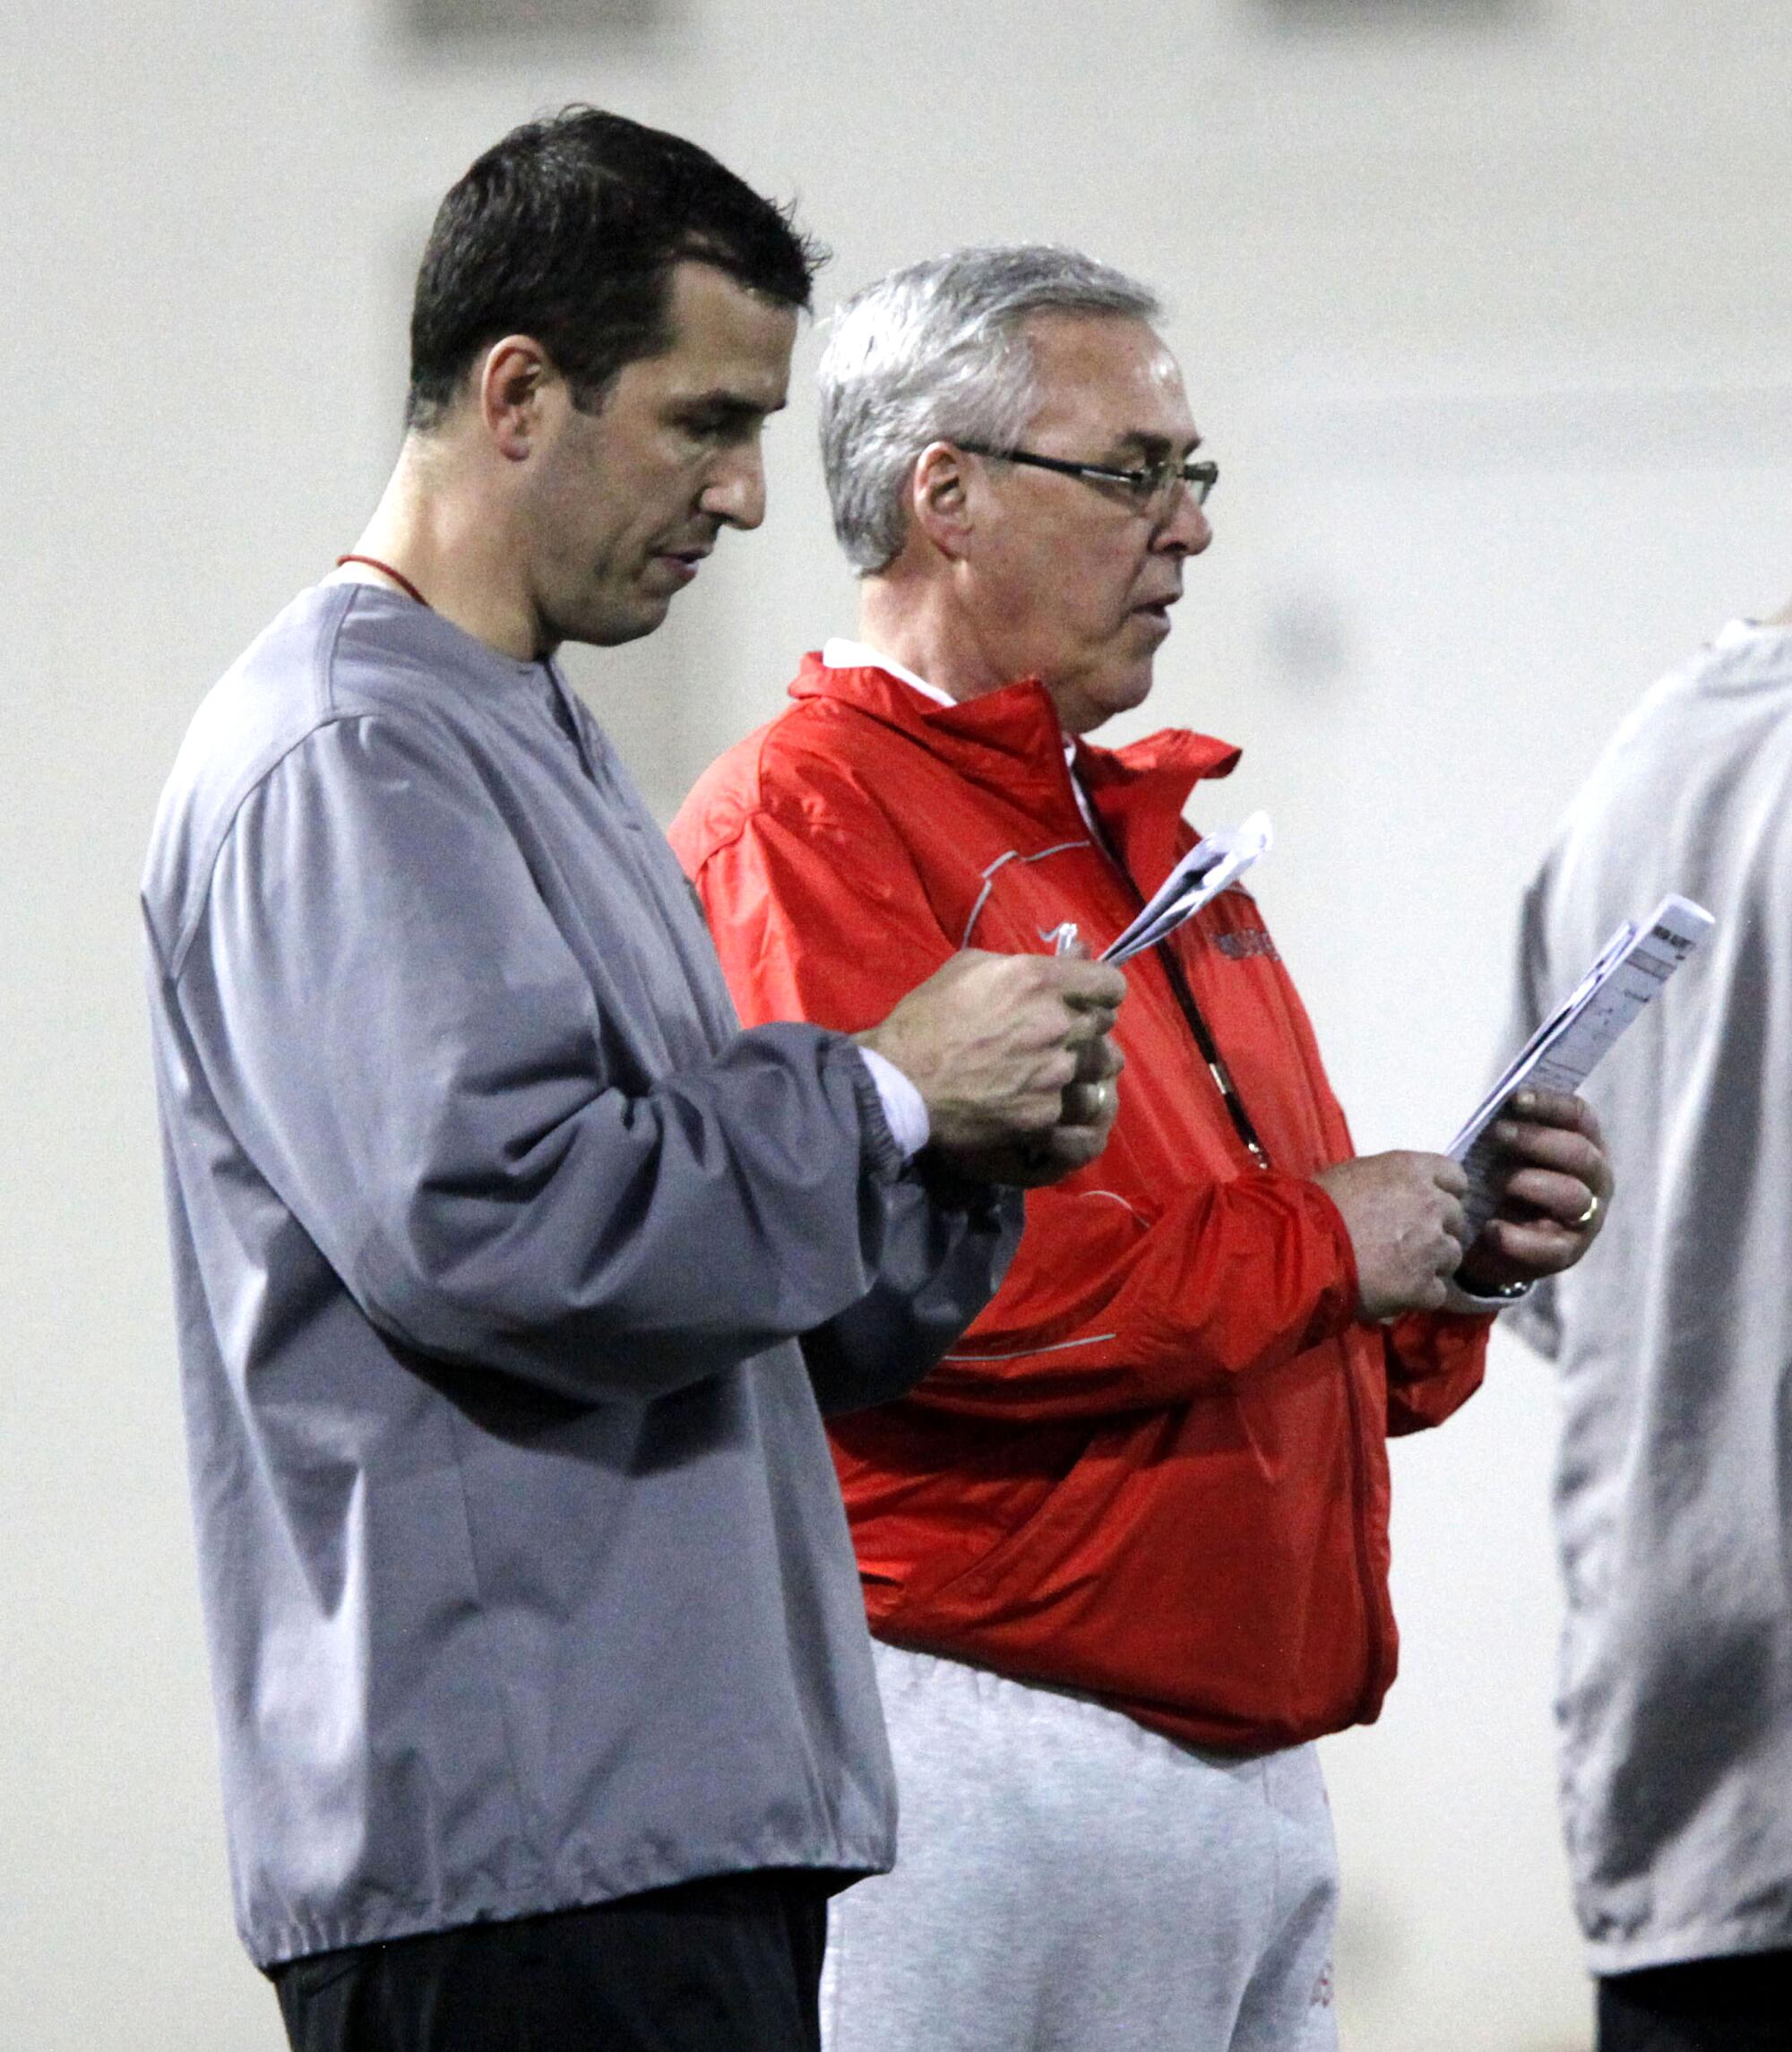 Ohio State assistant head coach Luke Fickell, left, and defensive coach Jim Haycock, right, in March 2011.